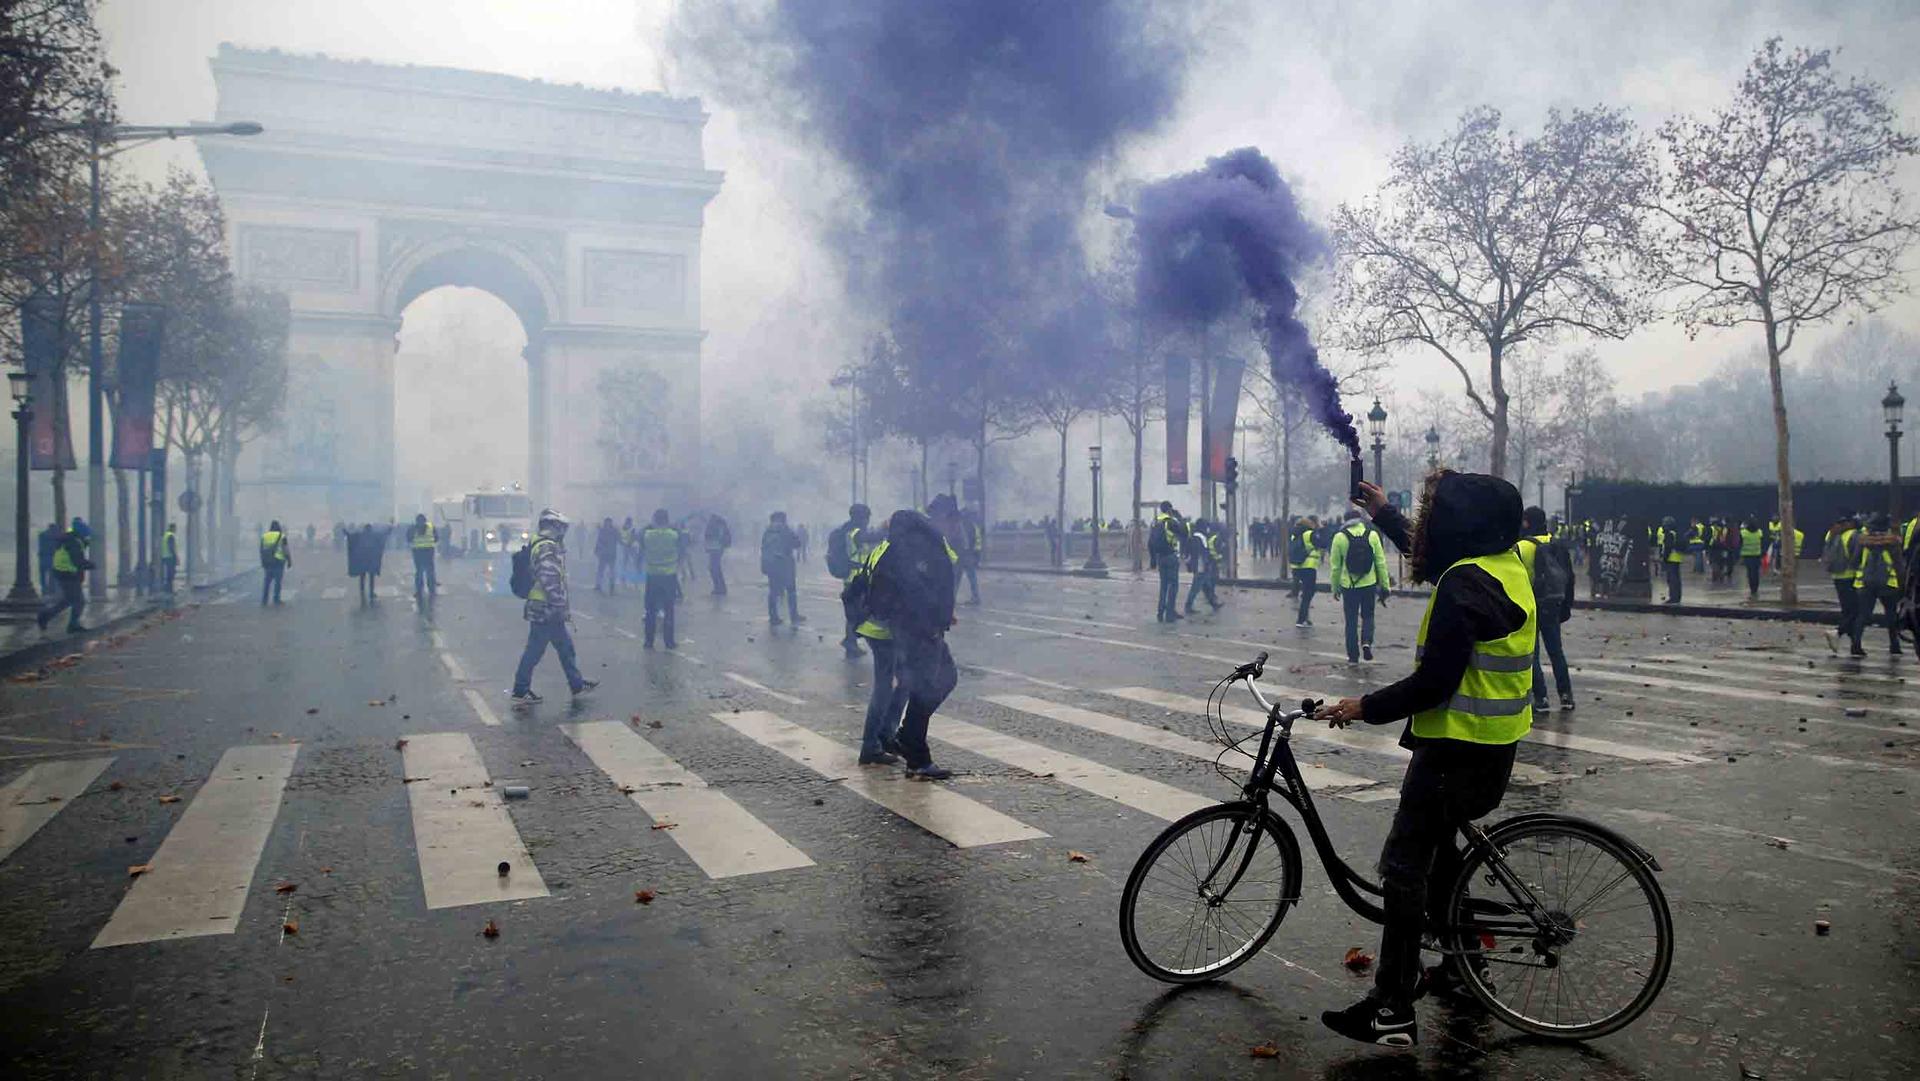 A man stands on a bicycle with a smoke flare in his hand, wearing a bright yellow vest in the street before the Arc de Triomphe. About 50 others also wearing yellow vests are also in the street.